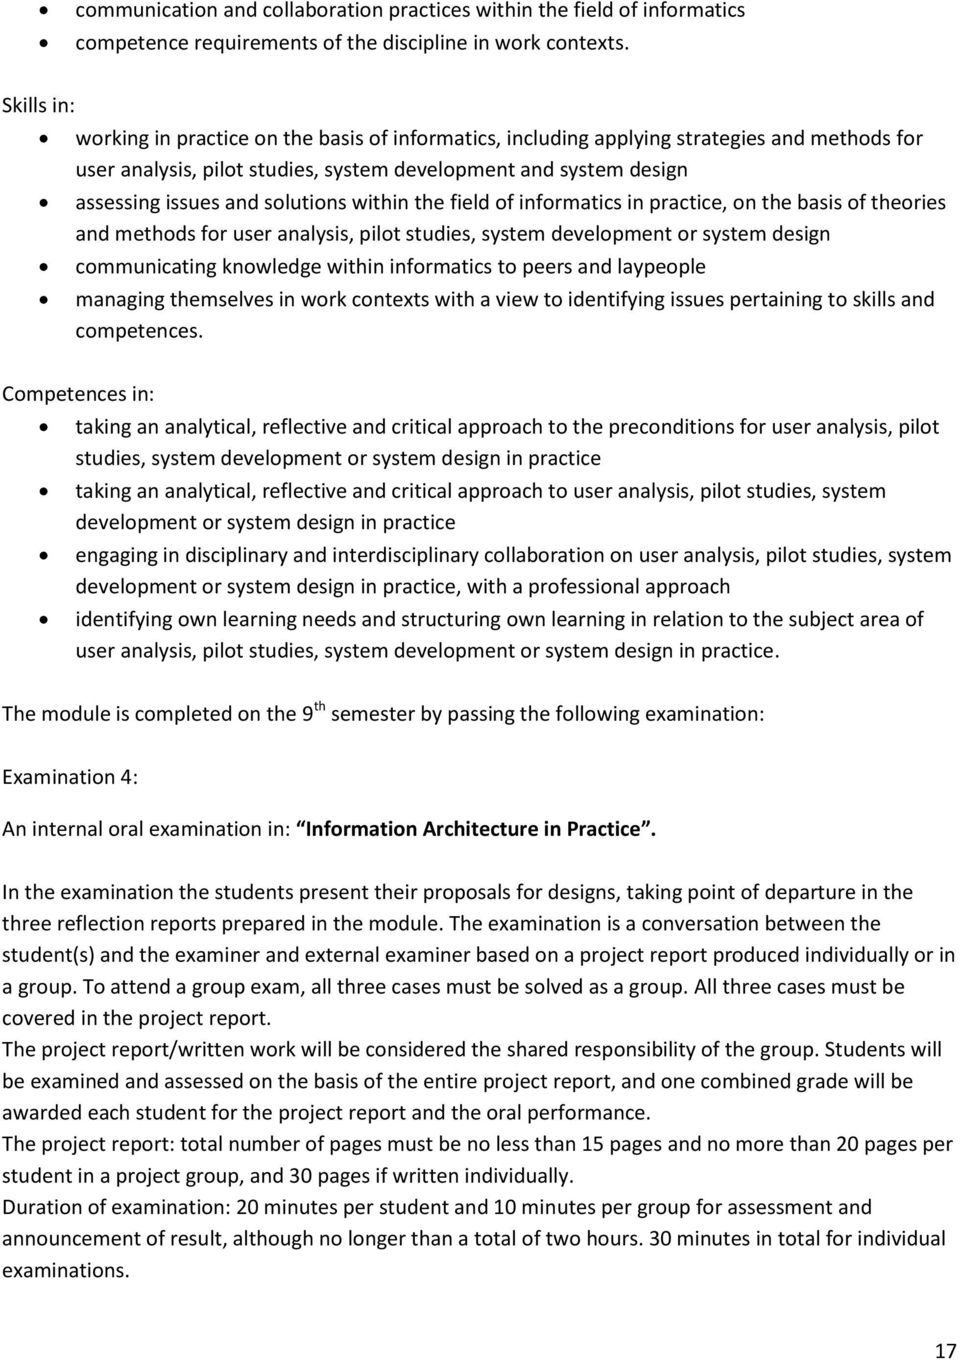 solutions within the field of informatics in practice, on the basis of theories and methods for user analysis, pilot studies, system development or system design communicating knowledge within